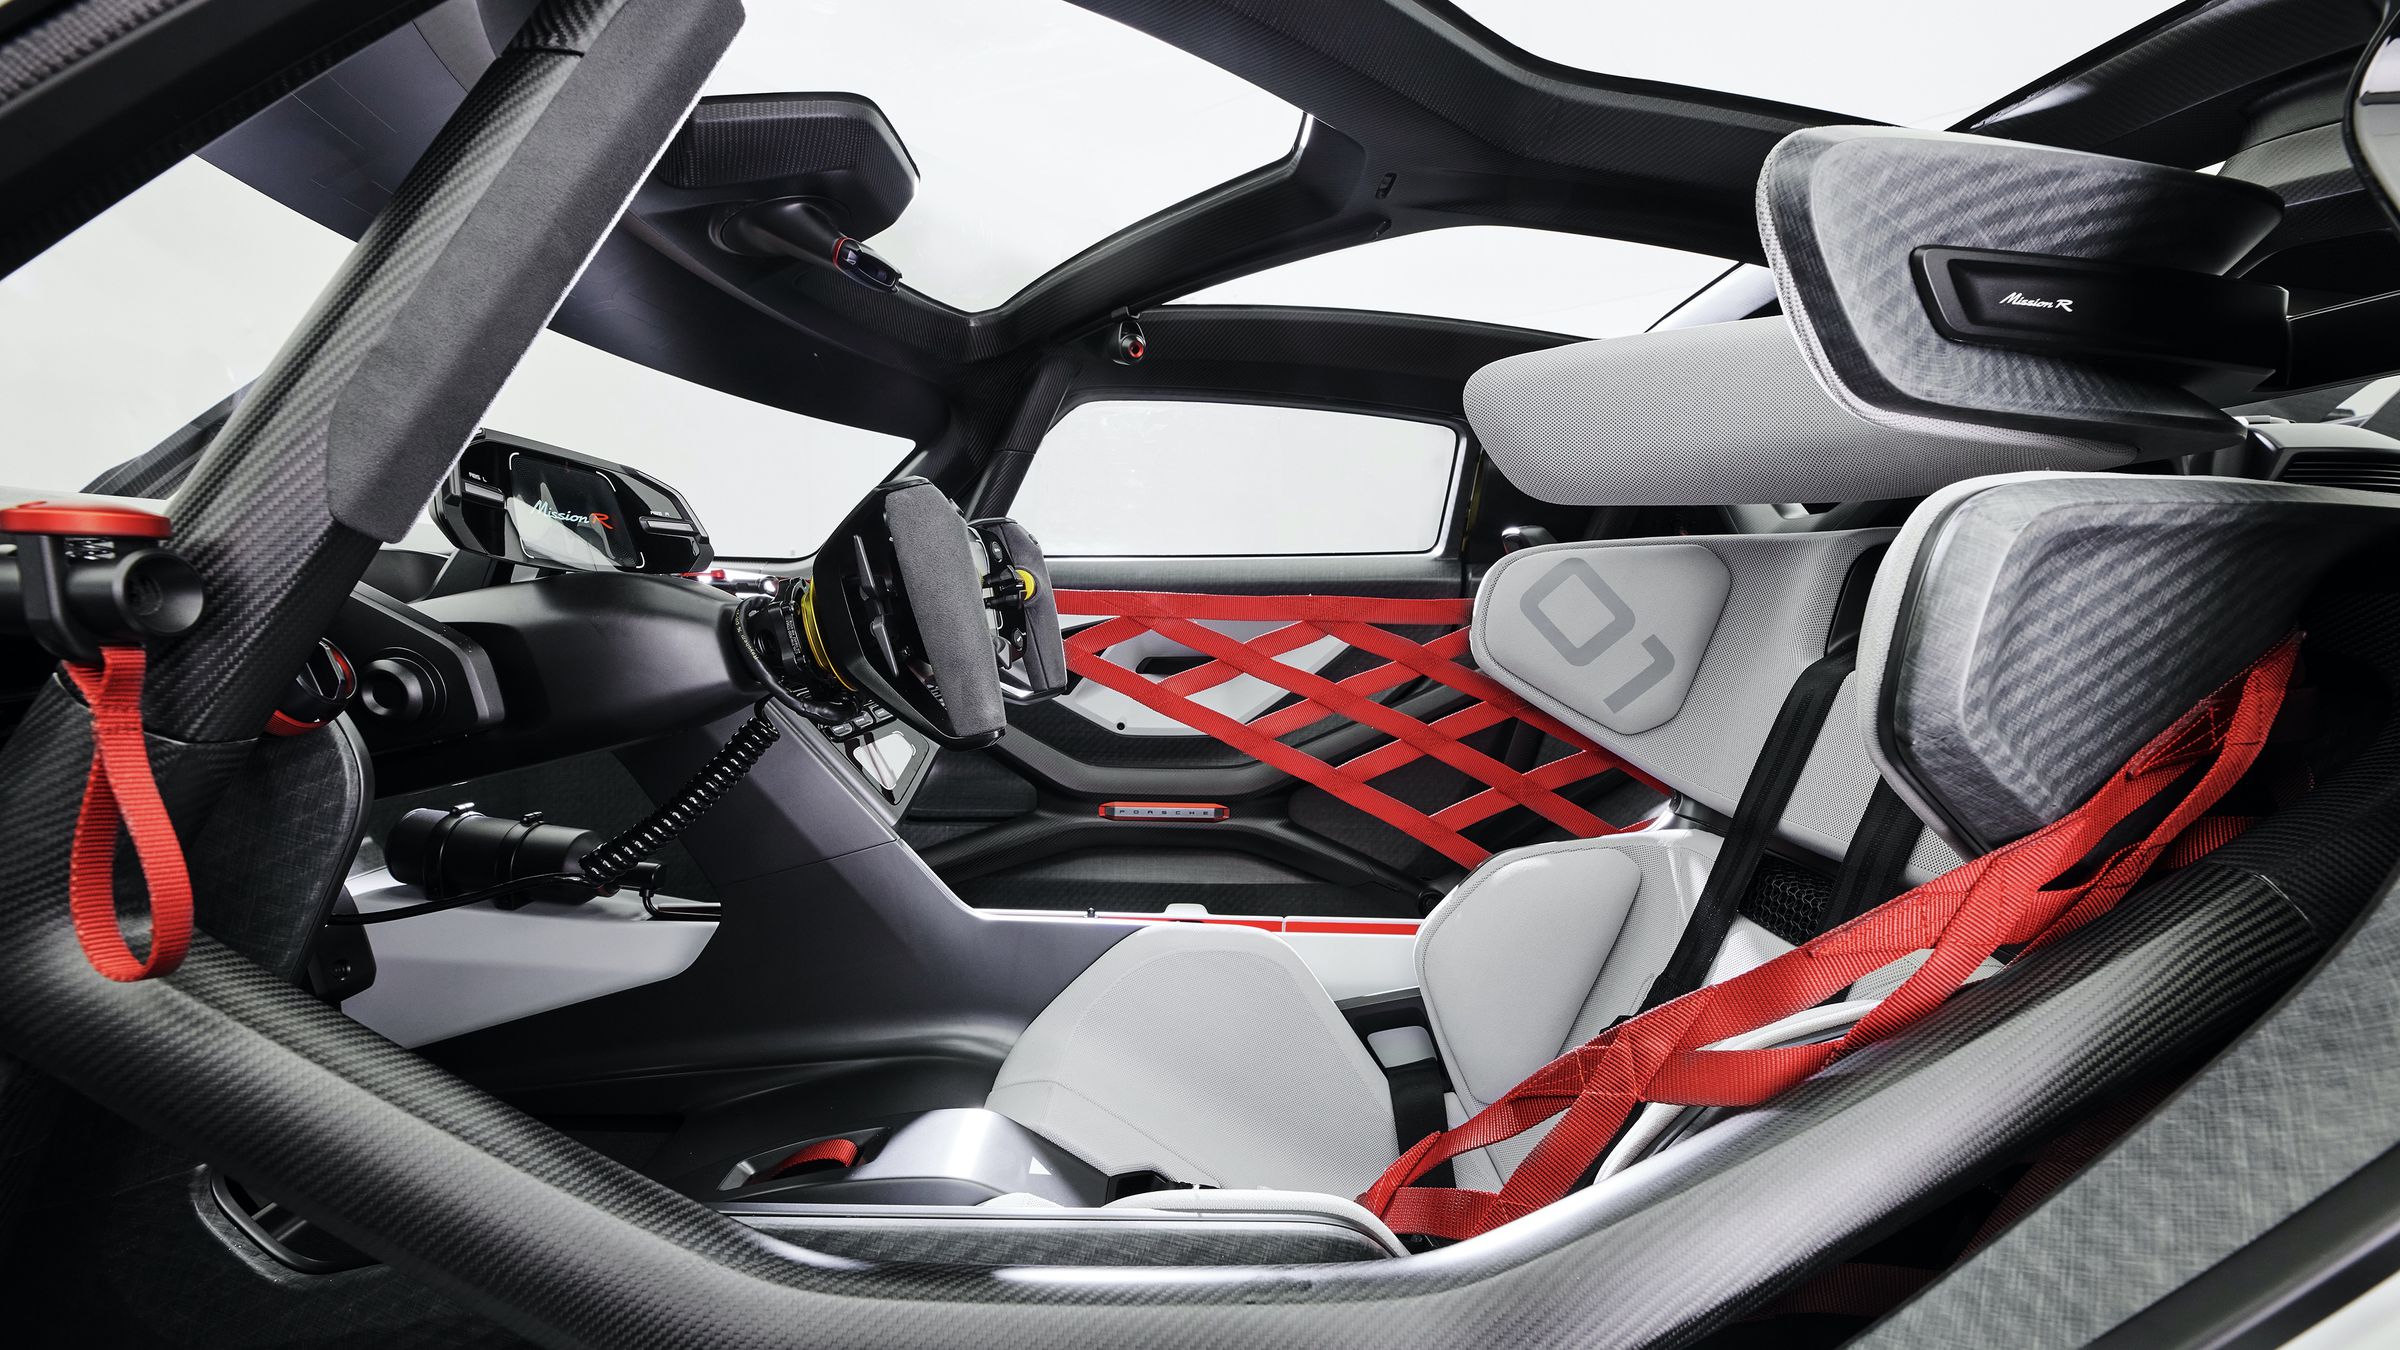 <em>The driver’s seat of the Mission R has distinct “gamer chair” vibes. Or maybe gaming chairs have race car vibes, who can say.</em>